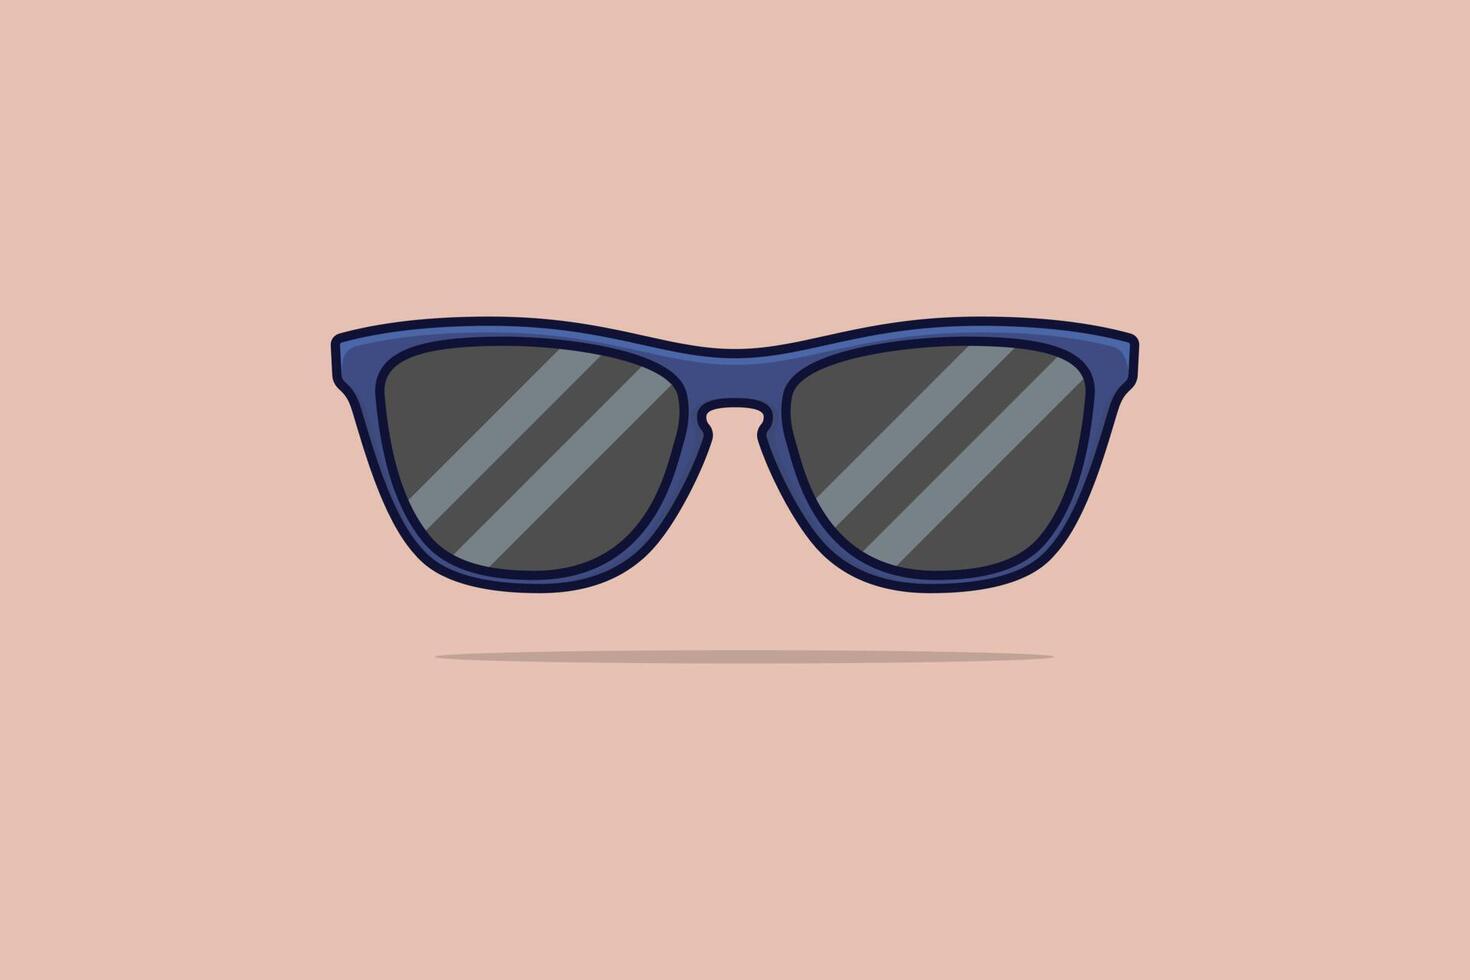 Fashion Summer Sunglasses and black lens optic vector illustration. Summer and fashion objects icon concept. Summer shiny grey sunglasses with shadow vector design on light orange background.